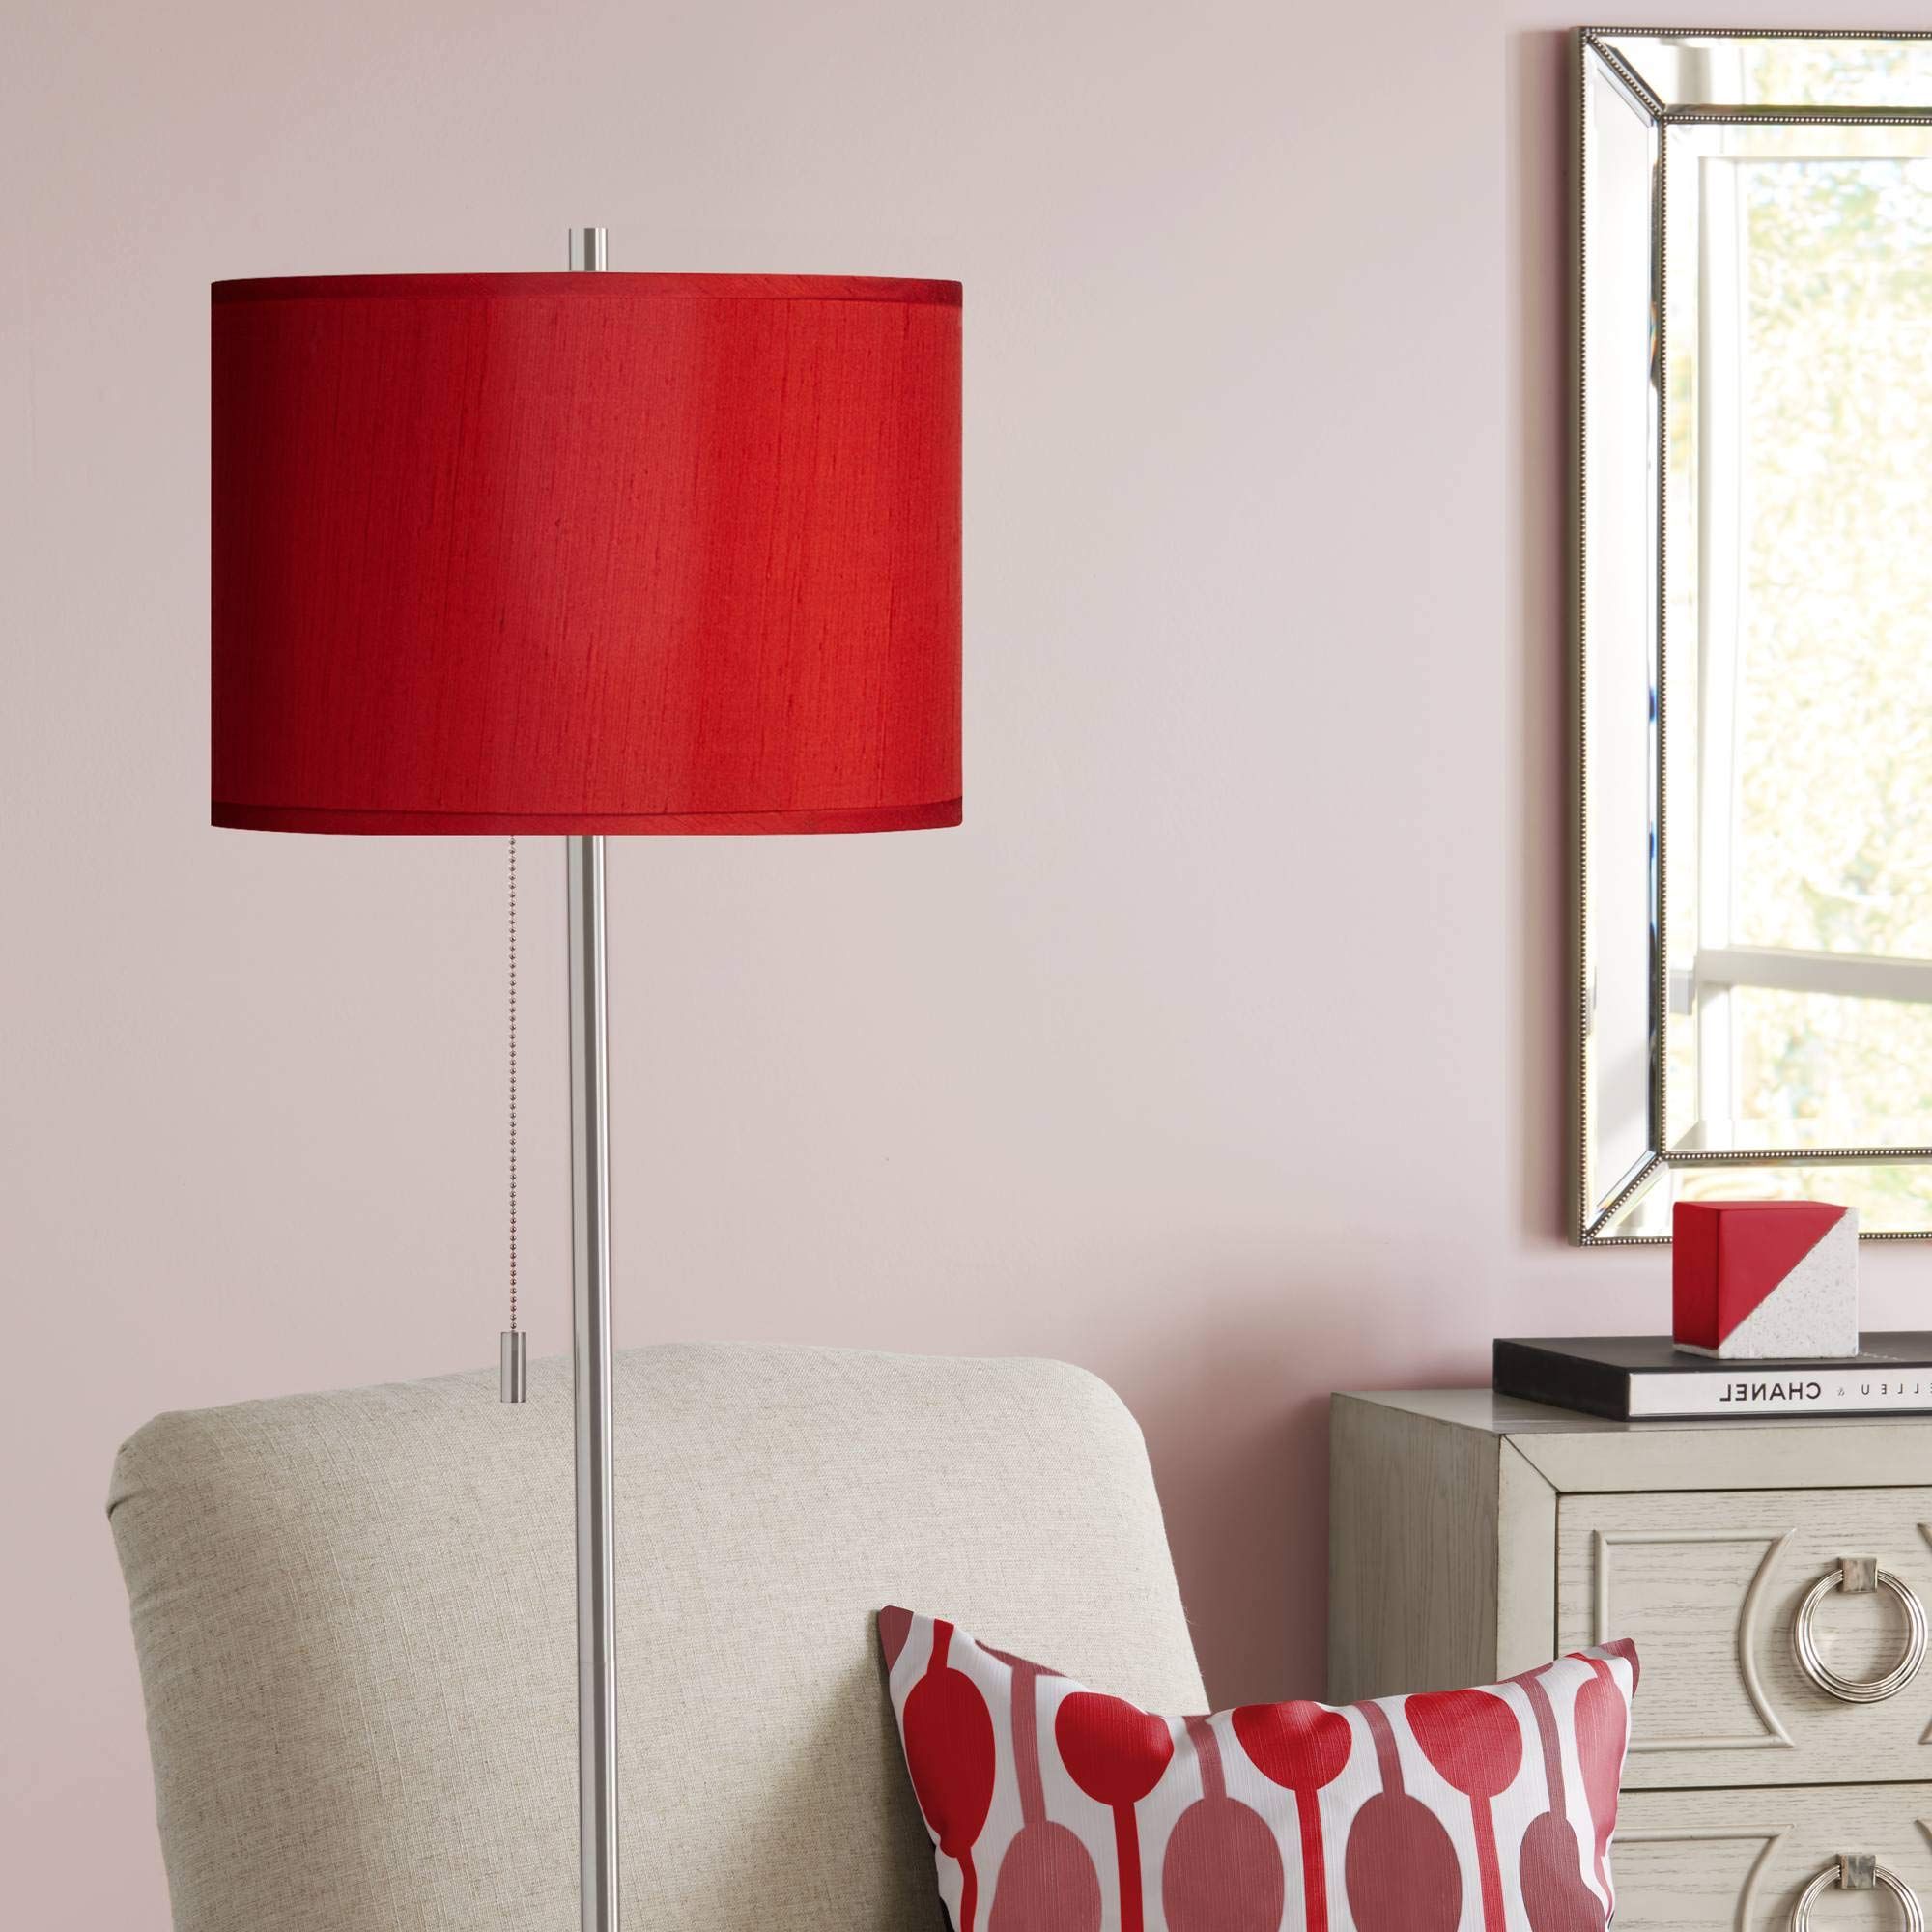 Textured Fabric Standing Lamps Within Popular Possini Euro Design Modern Minimalist Pole Lamp Floor Standing 62" Tall  Brushed Nickel China Red Textured Faux Silk Fabric Drum Shade For Living  Room Reading House Bedroom Home Decor (View 7 of 10)